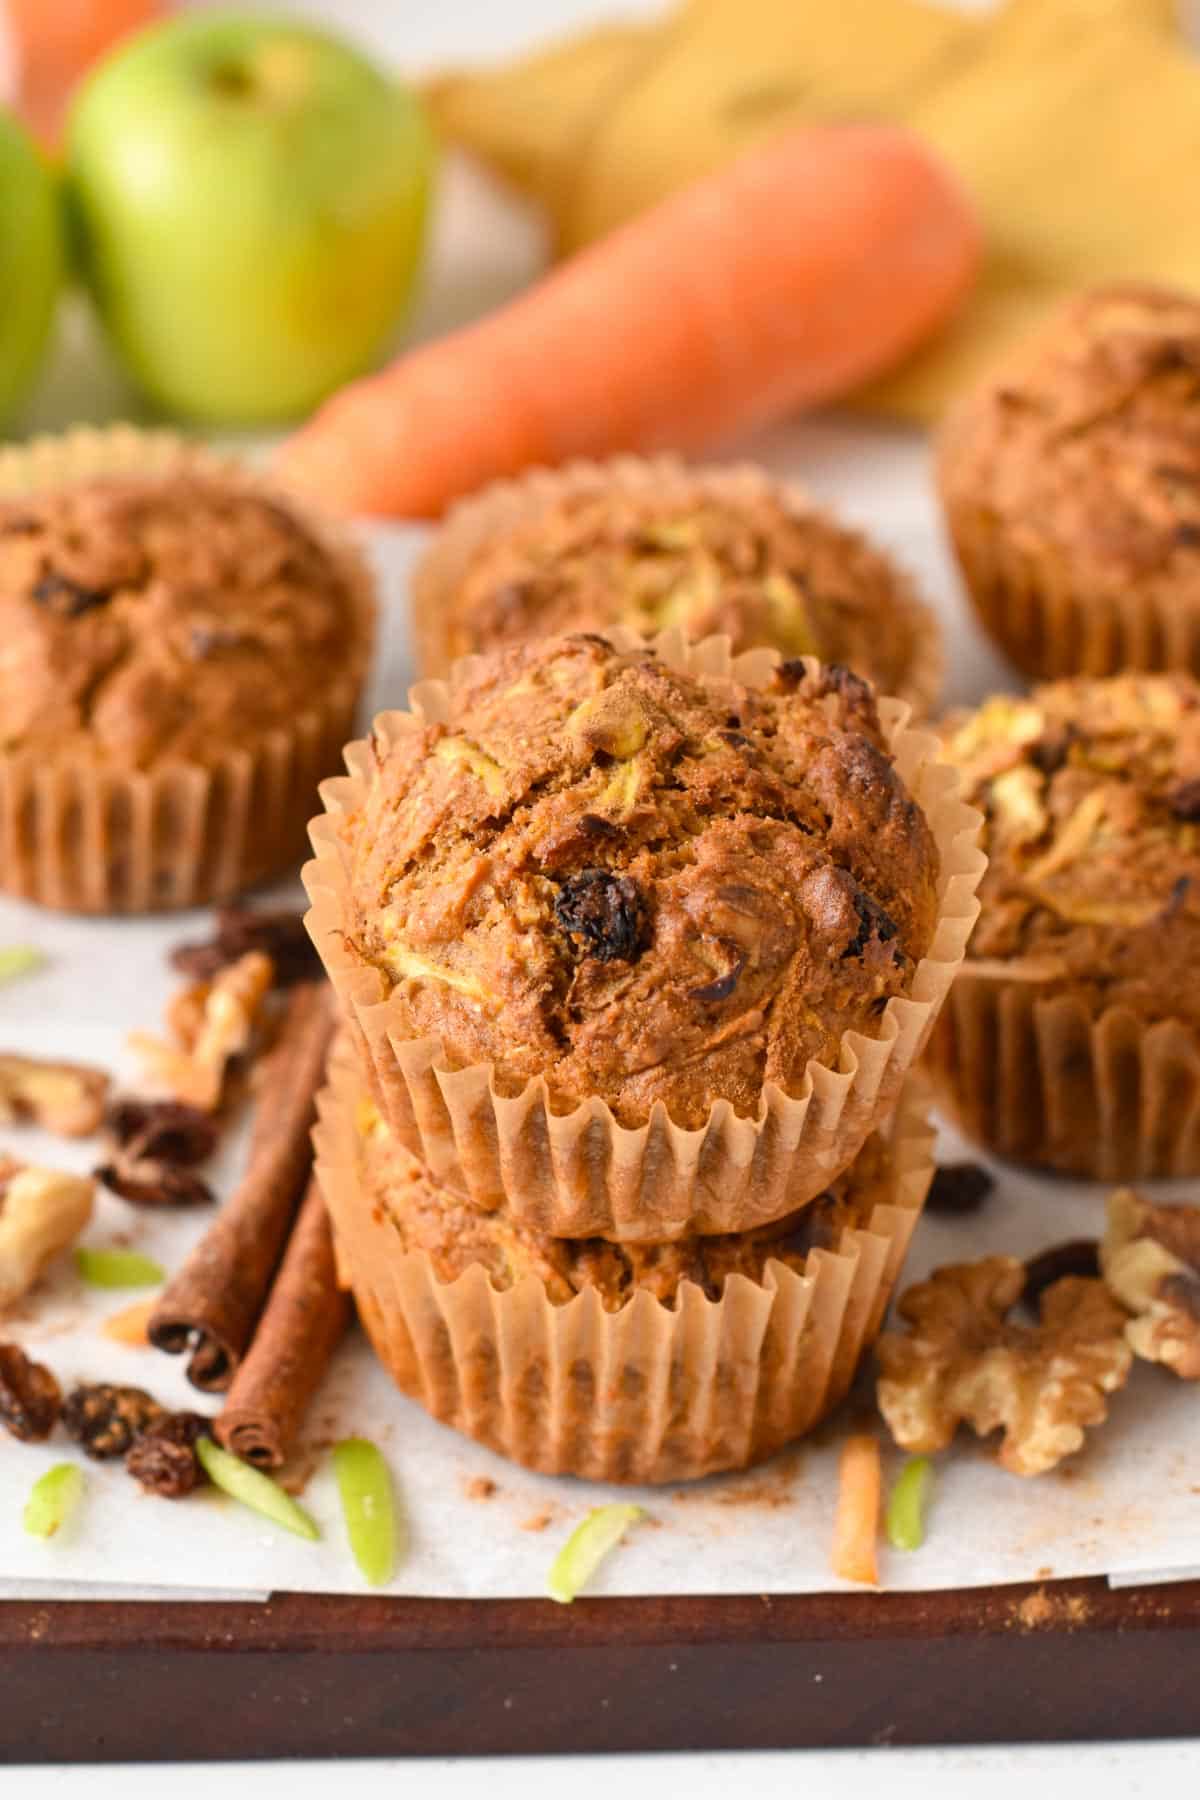 A batch of vegan Morning Glory Muffins with carrots and green apples in the background.